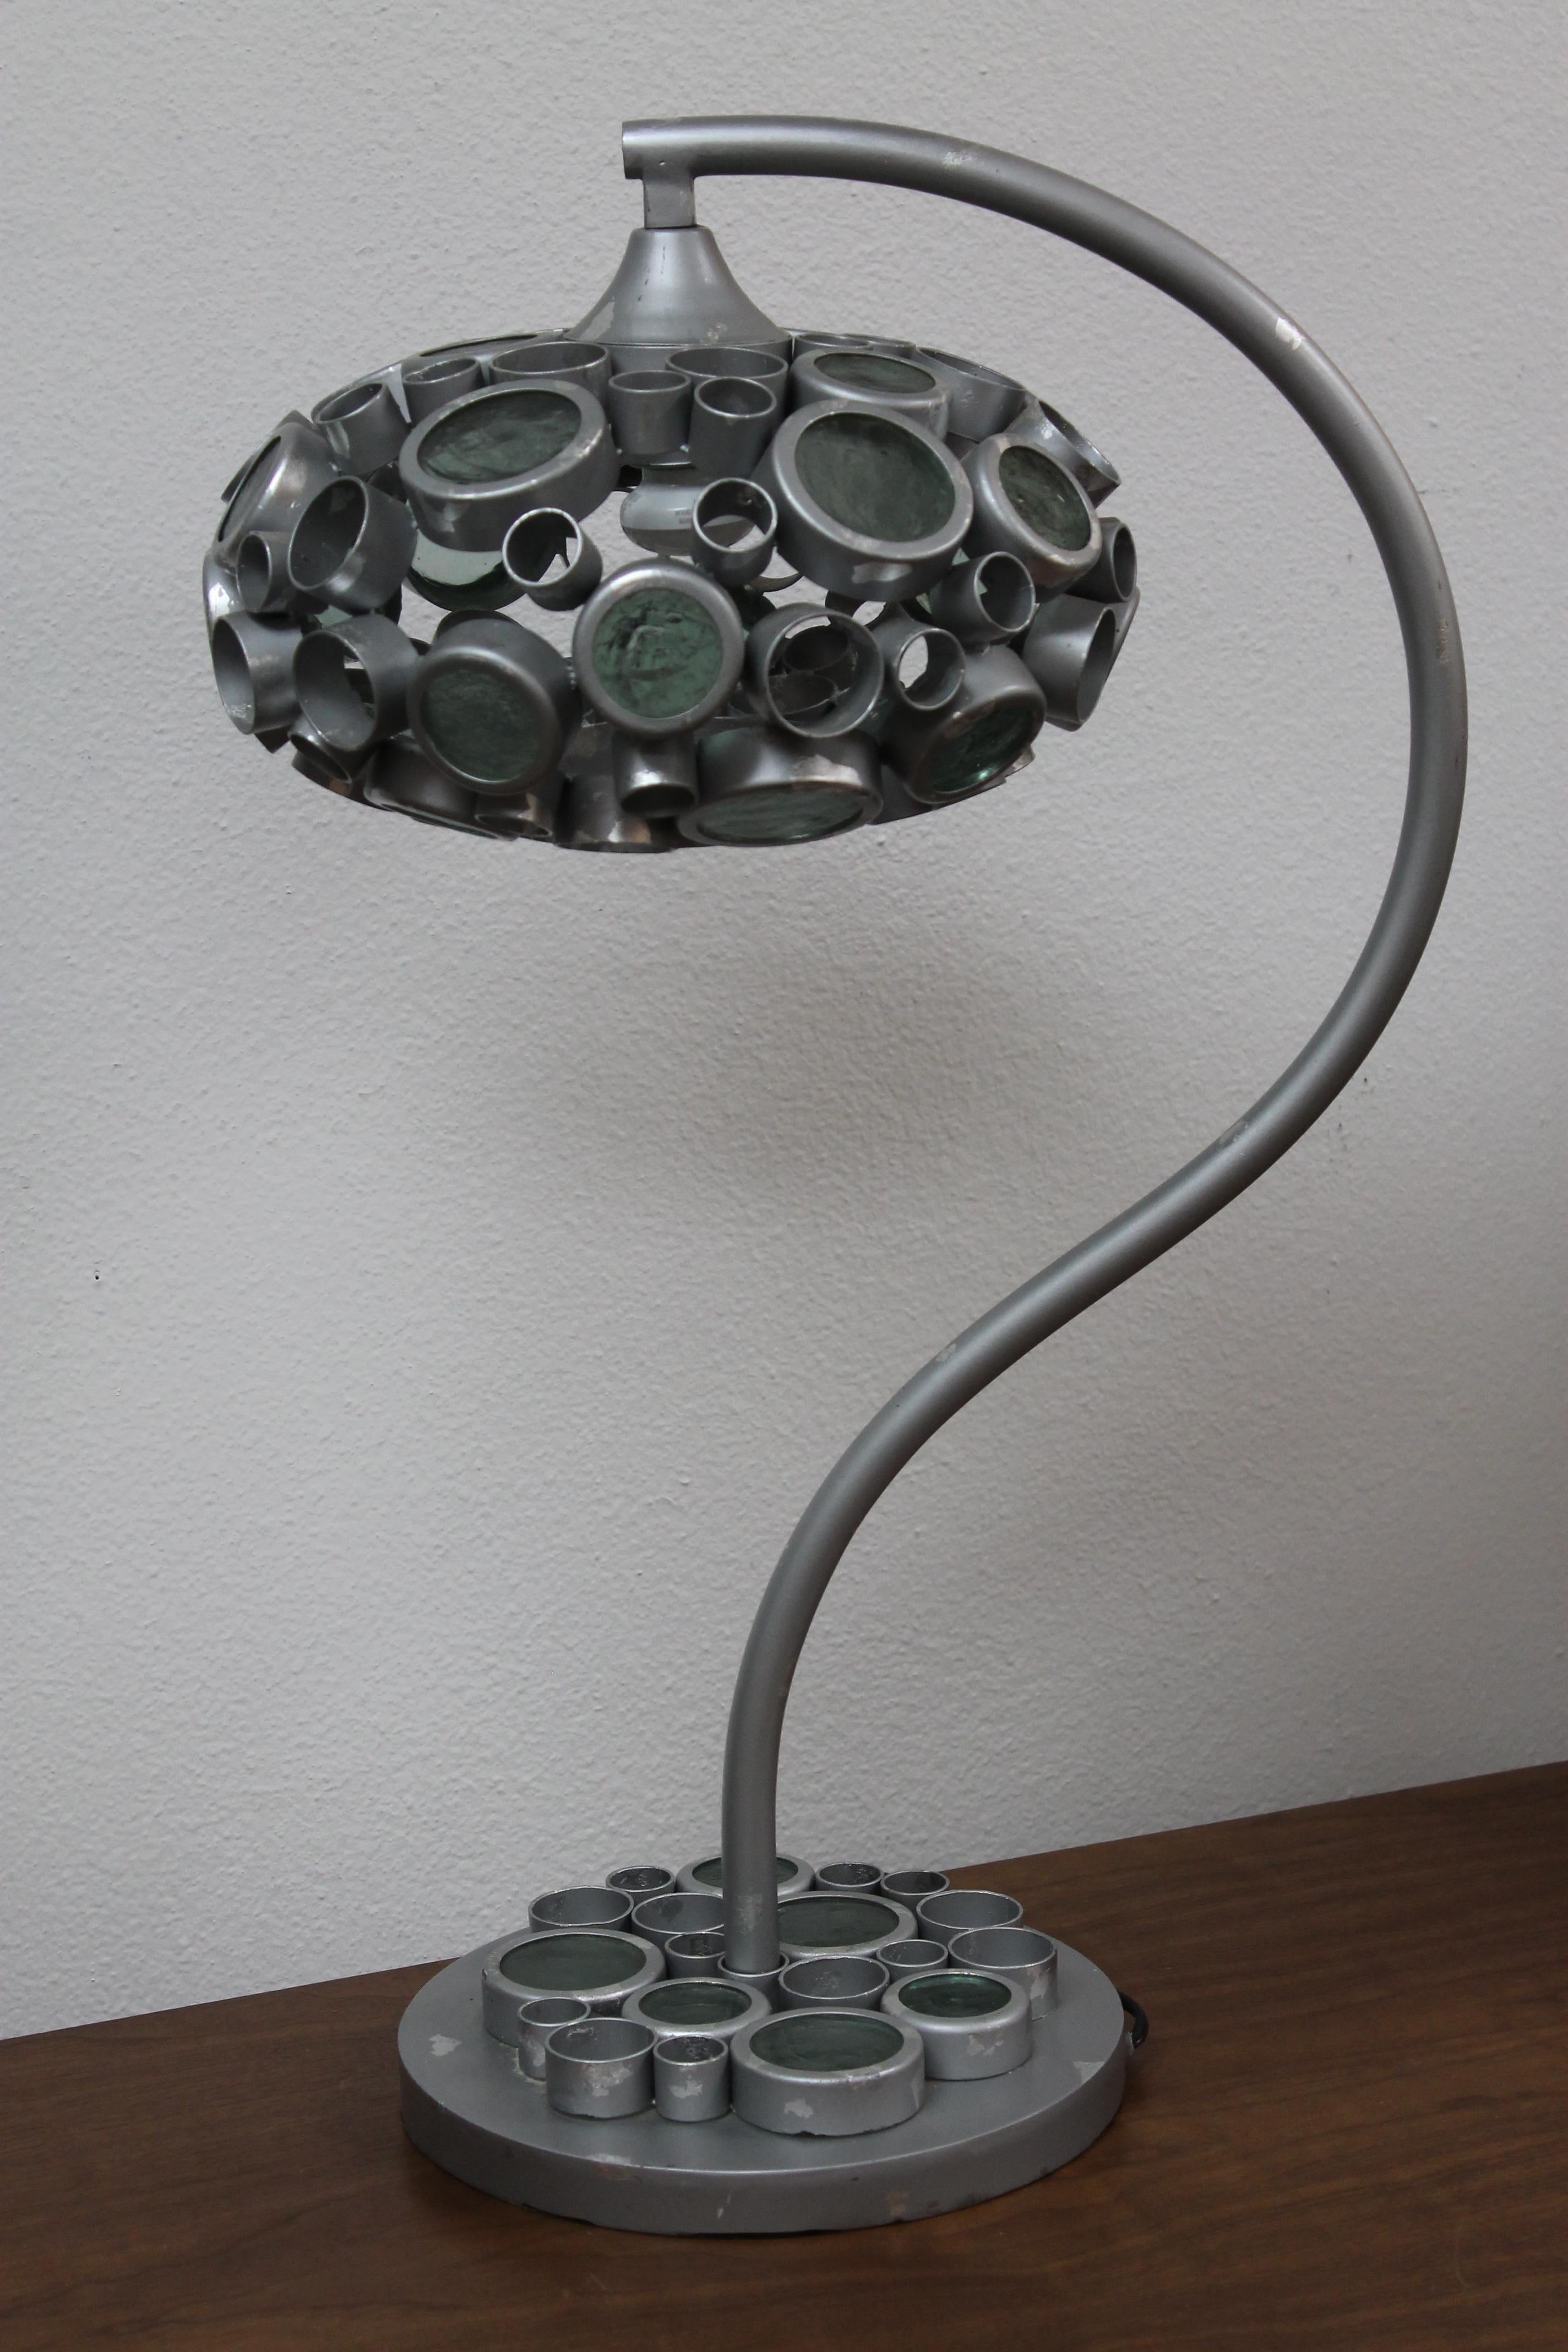 A hand crafted steel lamp with welded steel rings forming a mushroom shaped shade with textured clear pale green-grey glass. The glass seems to be about 1/4